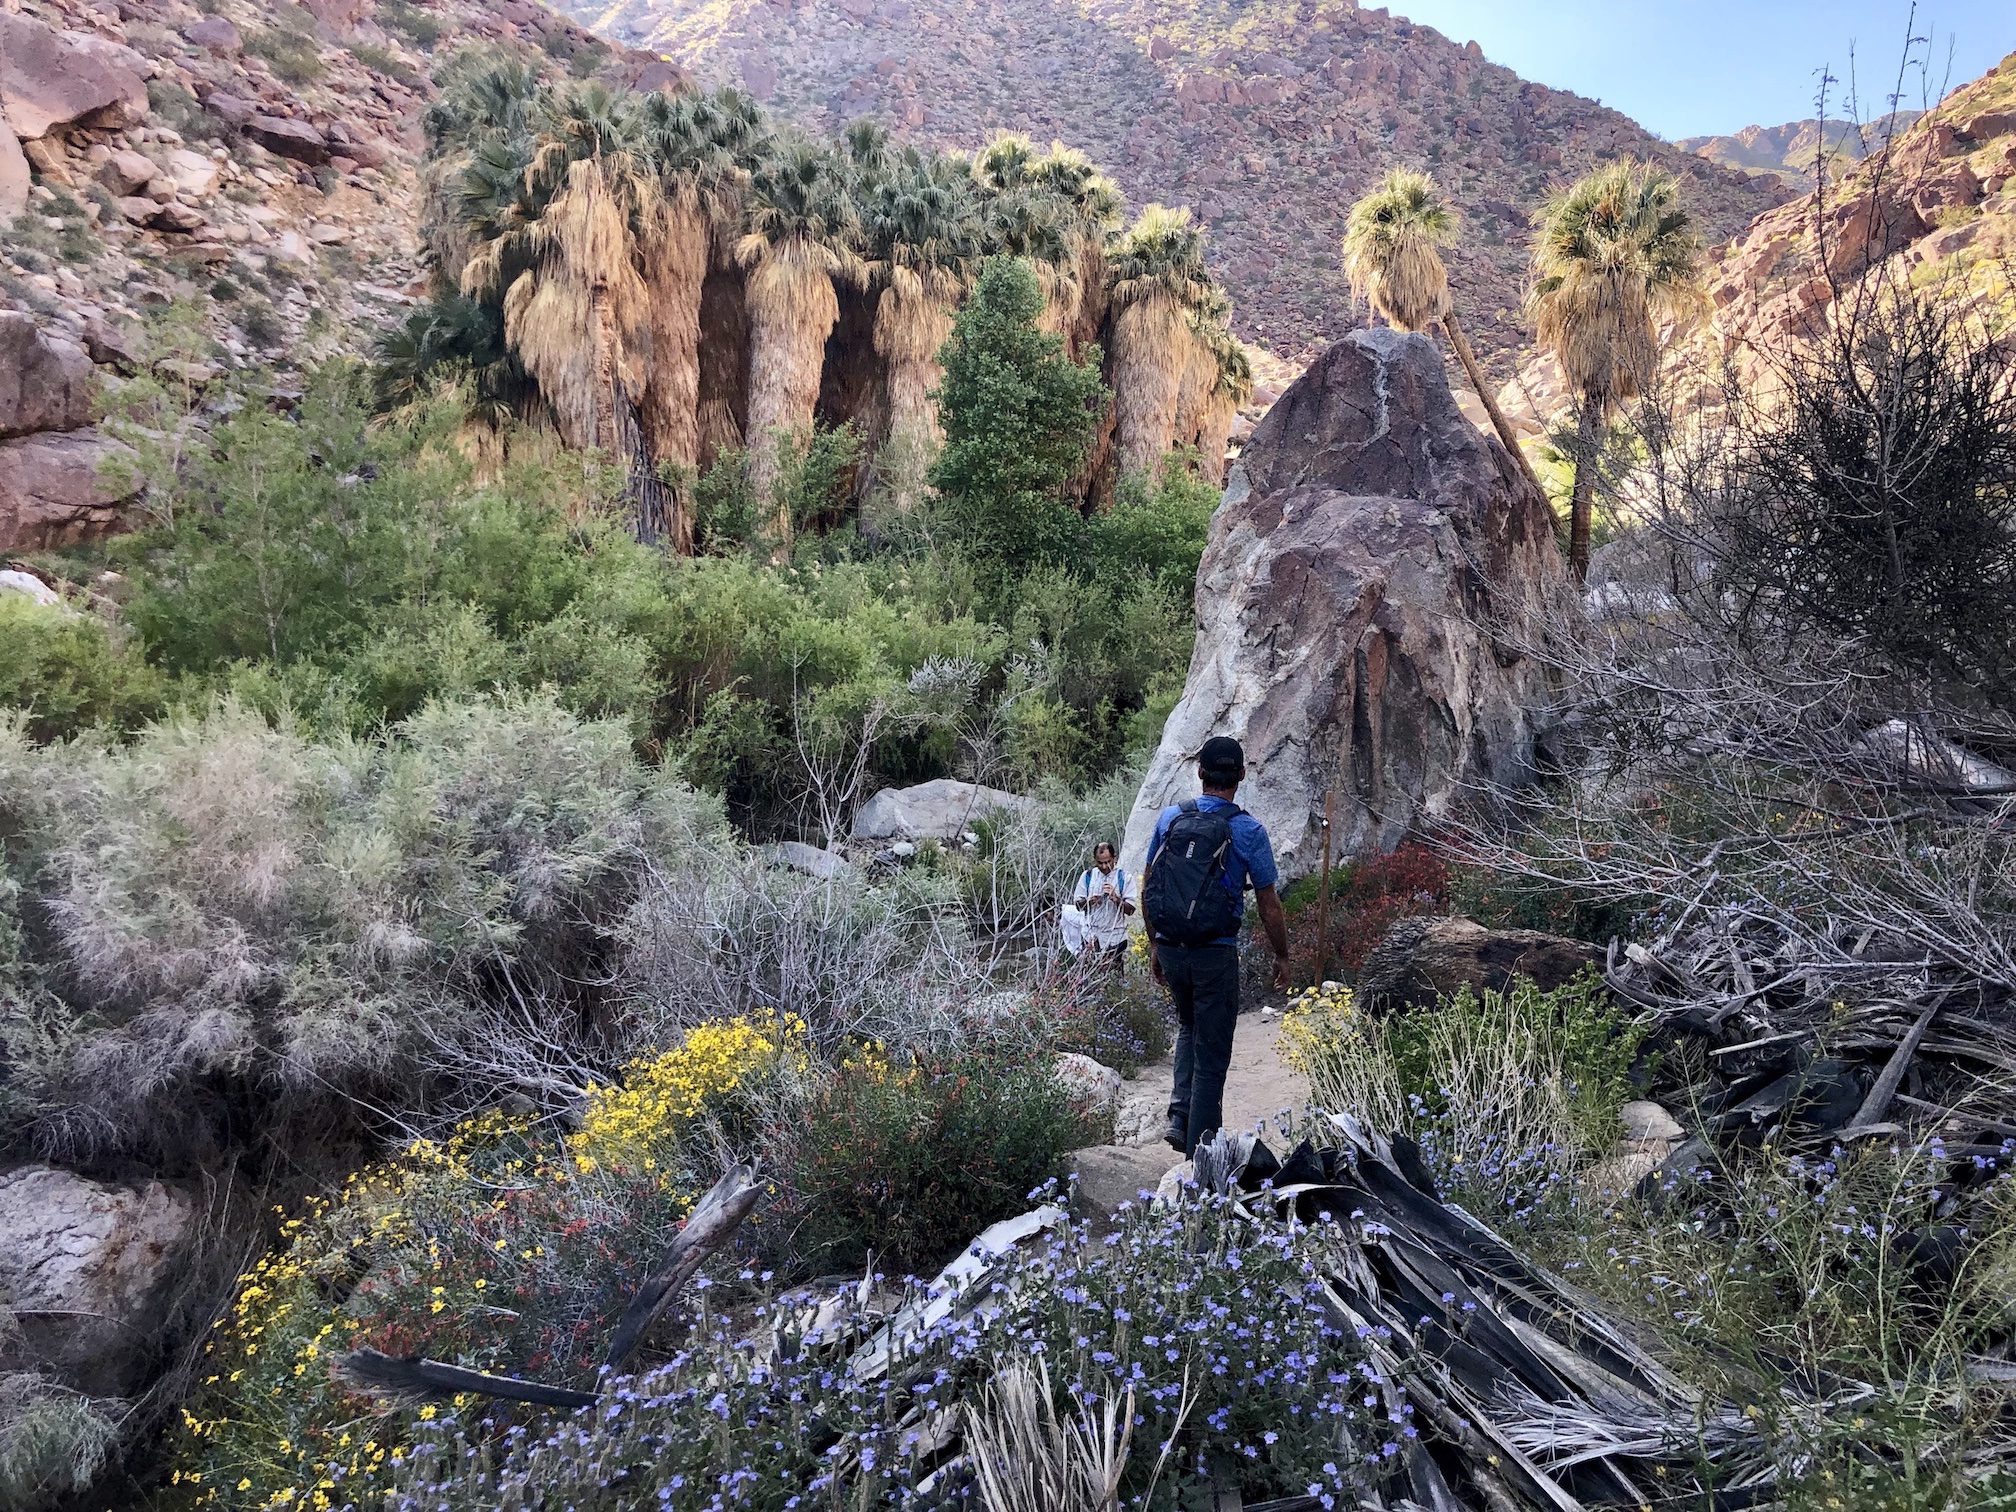 An explorer hikes in a palm oases in Anza Borrego State Park in California.